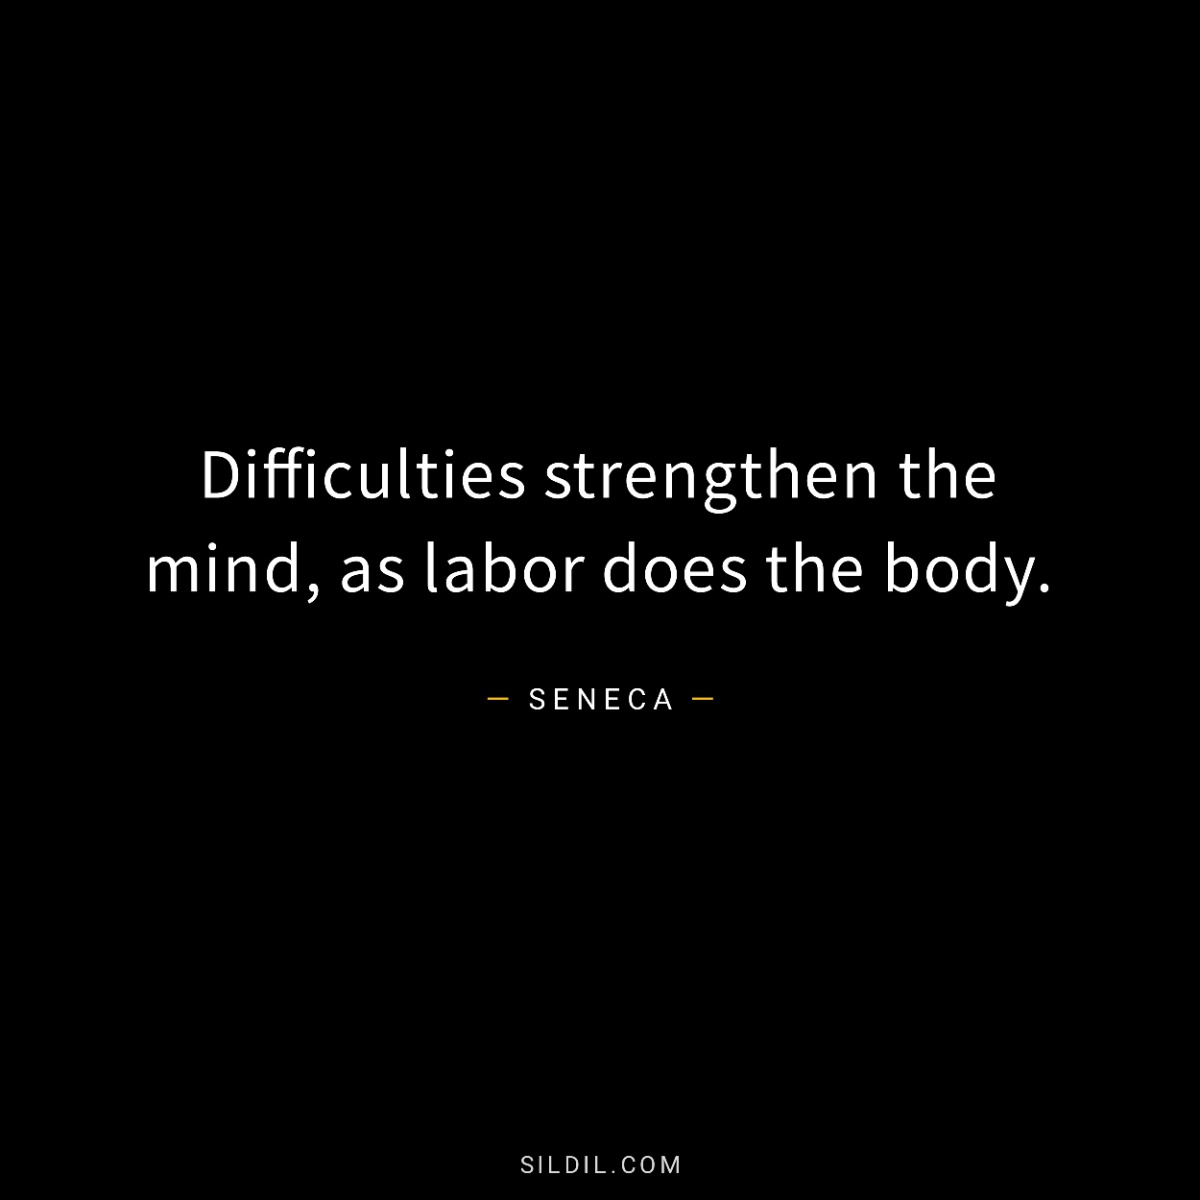 Difficulties strengthen the mind, as labor does the body.